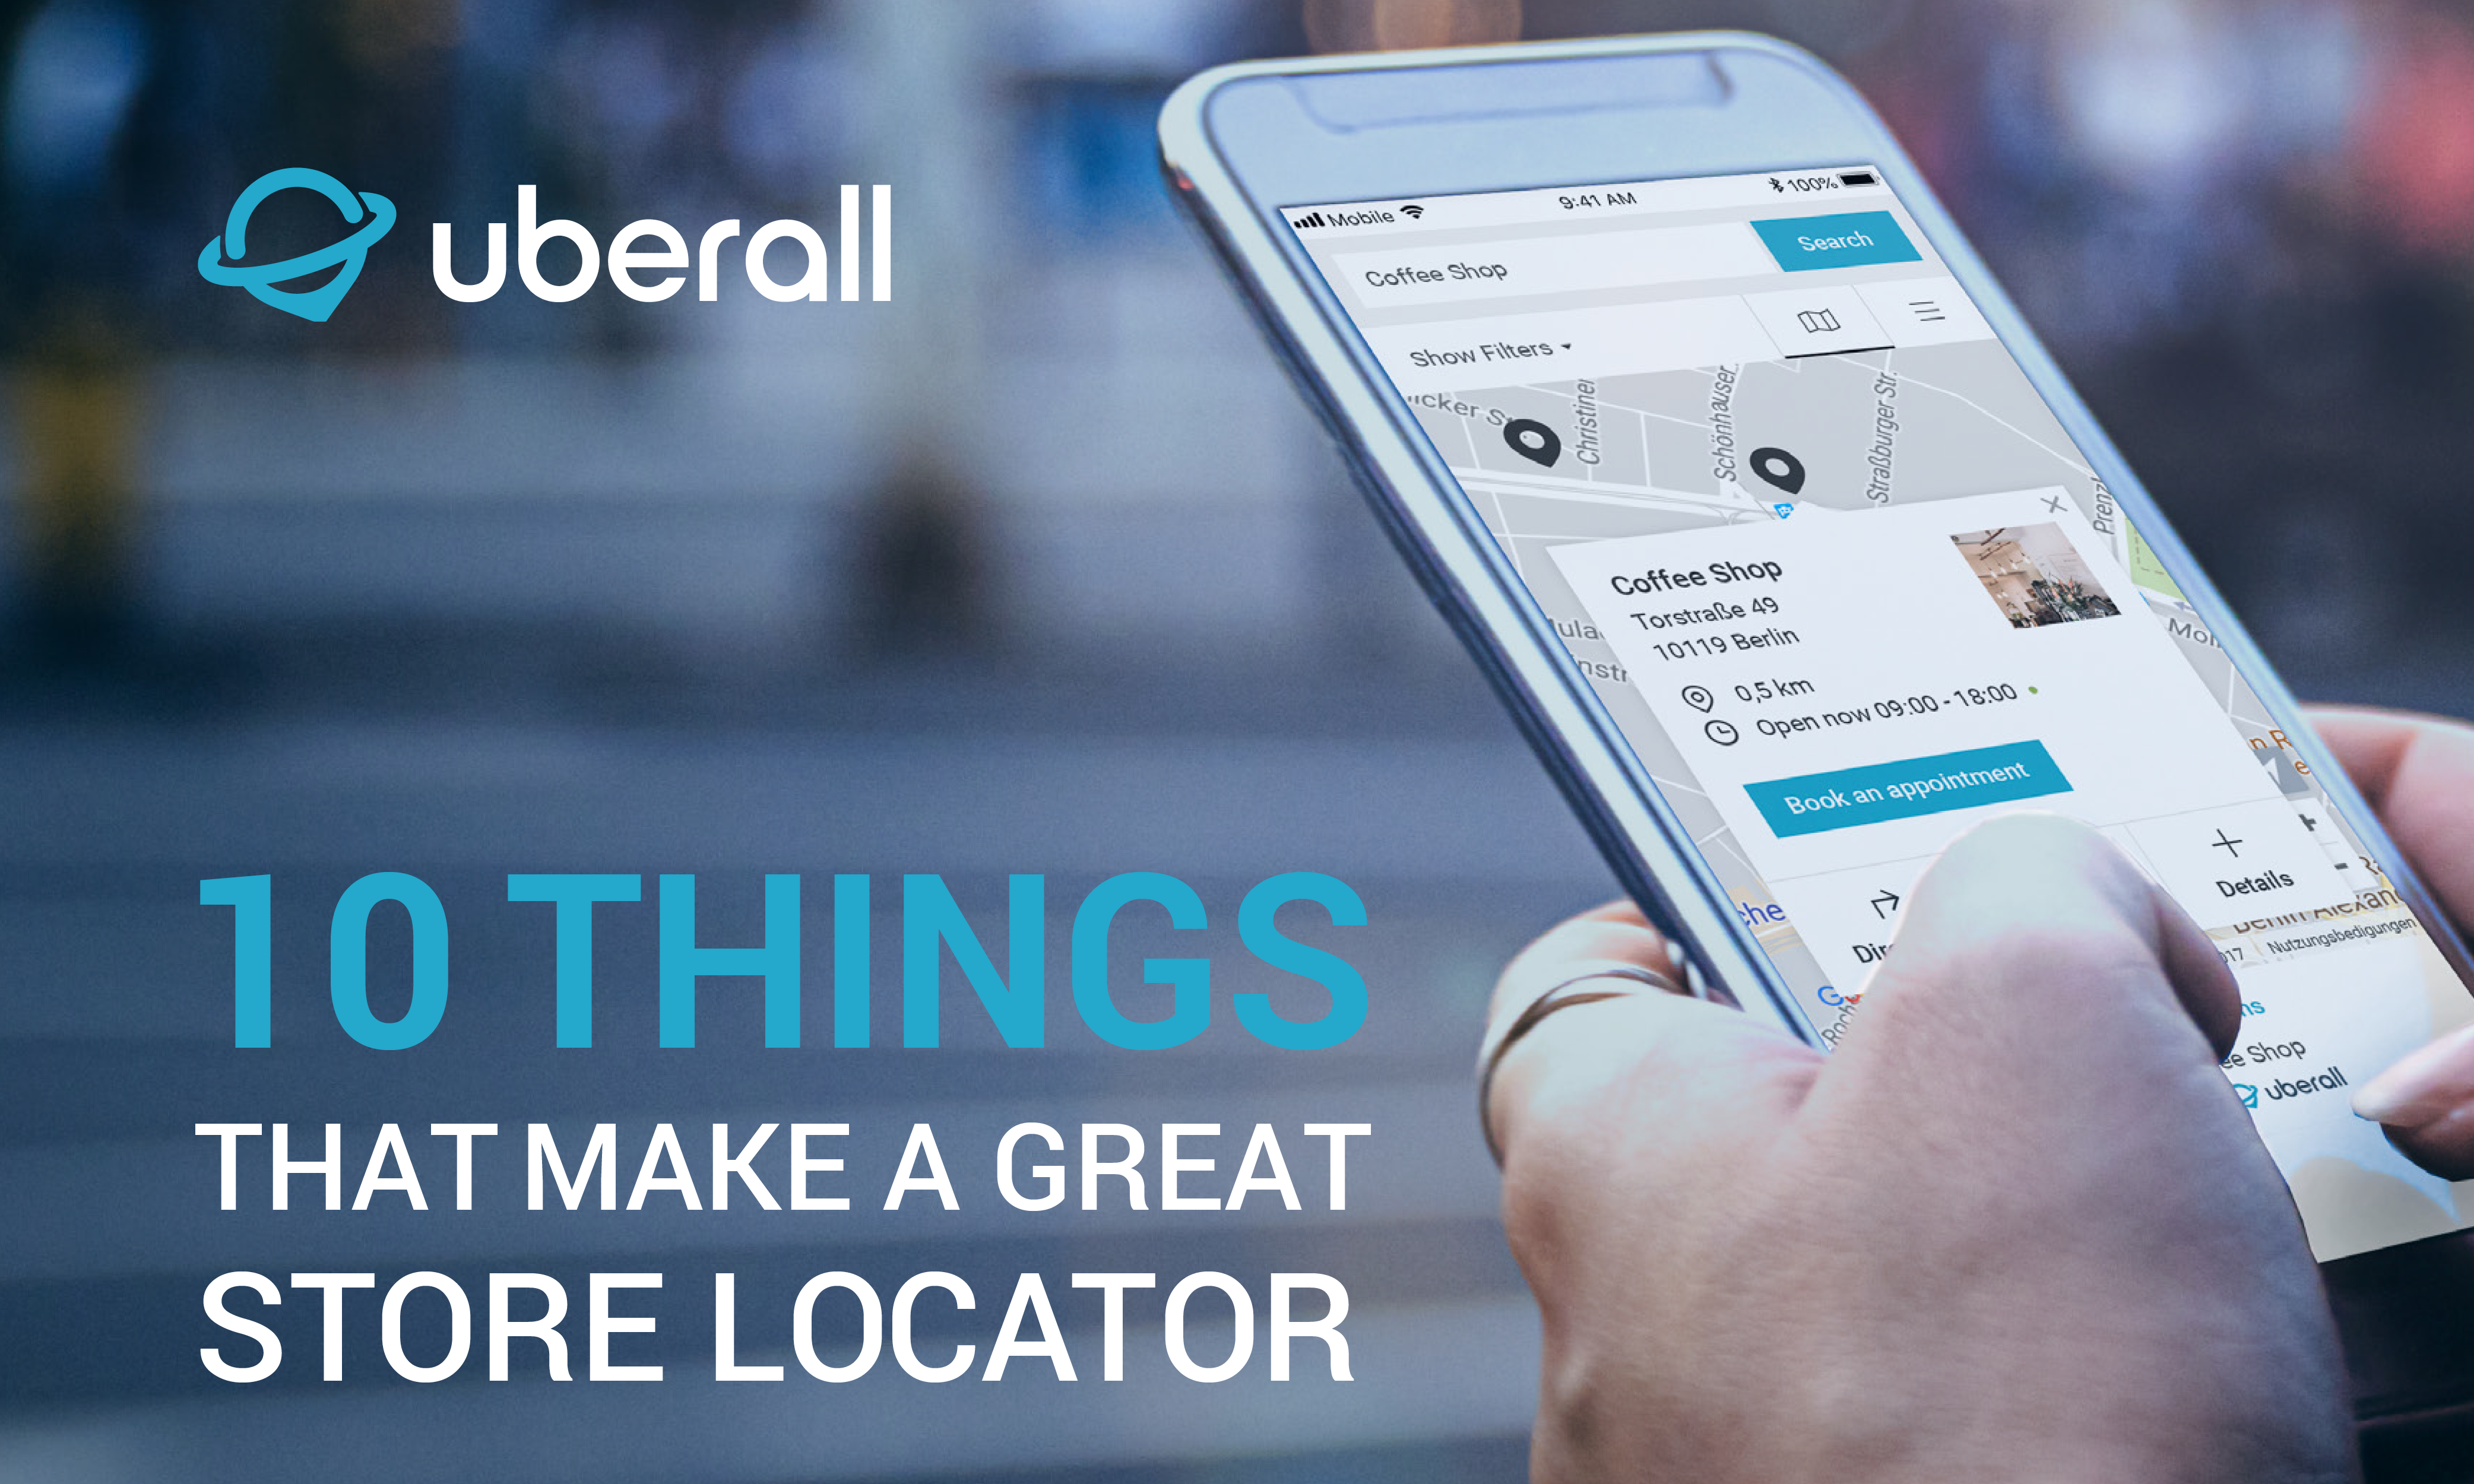 eBook: 10 Things That Make A Great Store Locator